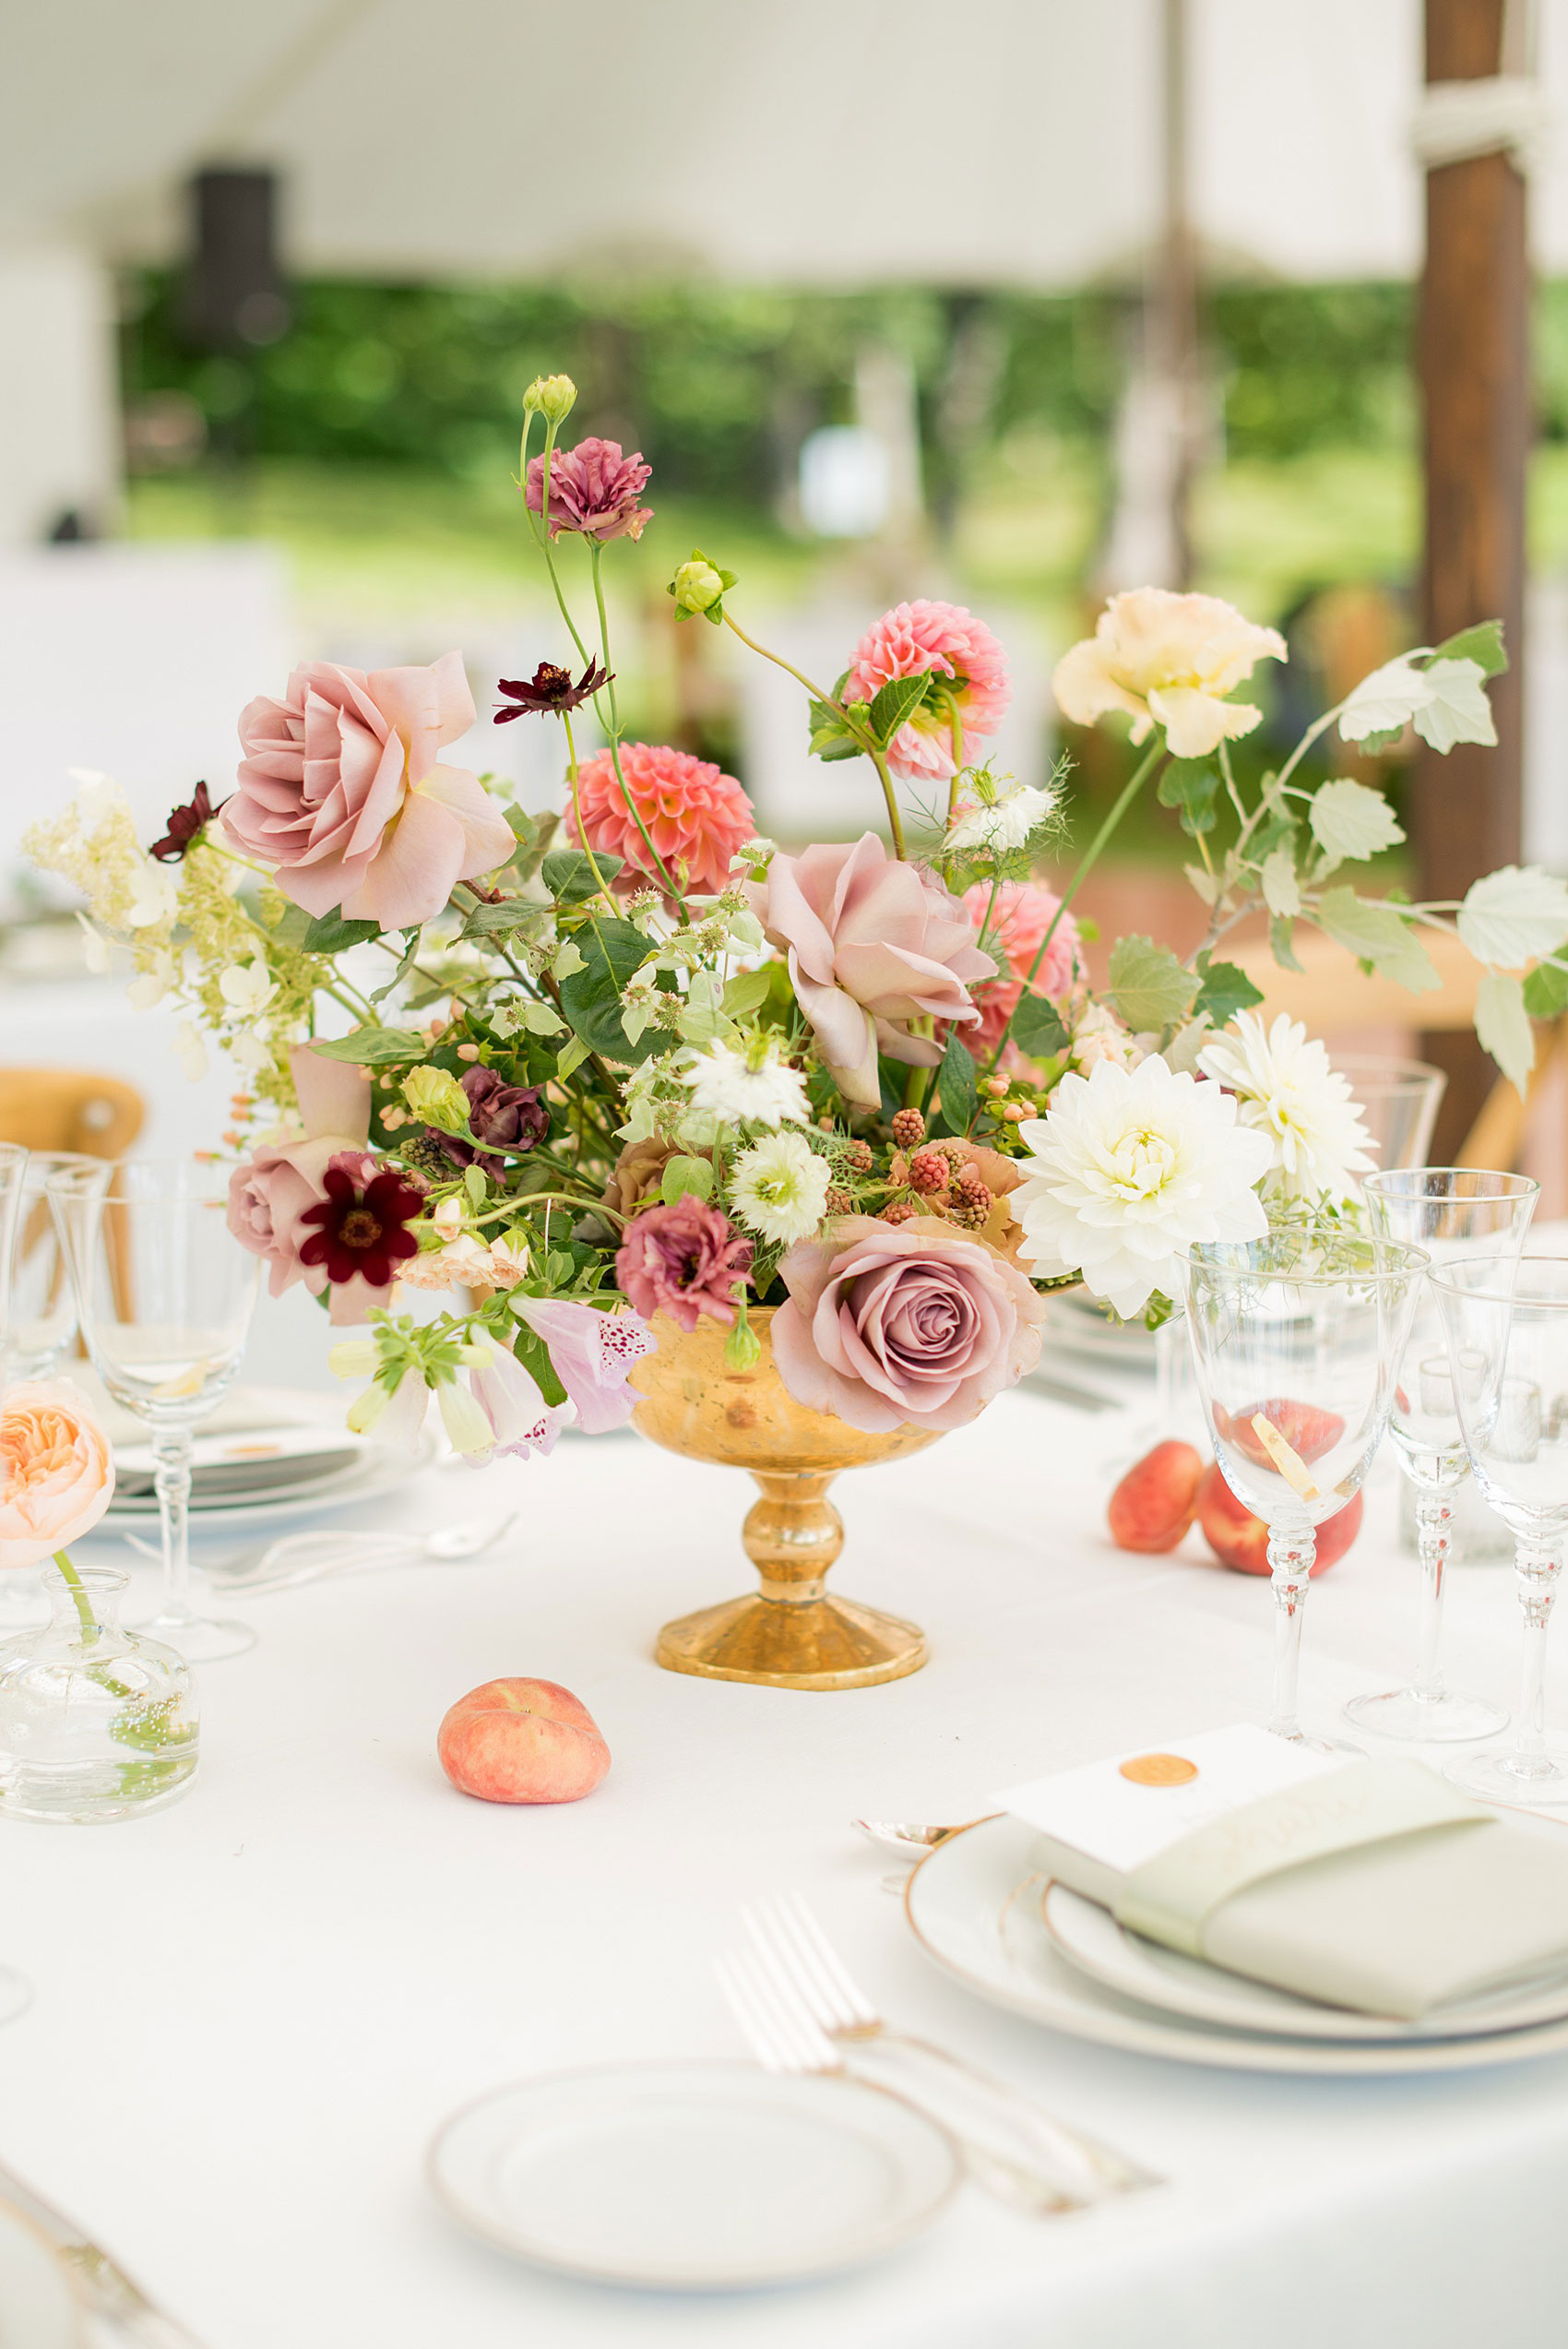 Mikkel Paige Photography photos from a Southwood Estate Wedding in Germantown, New York in the Hudson Valley. Picture of the centerpieces on a table with flowers including mauve, dusty rose, burgundy, lavender,and pink roses, dahlias, spray roses, peaches and berries.